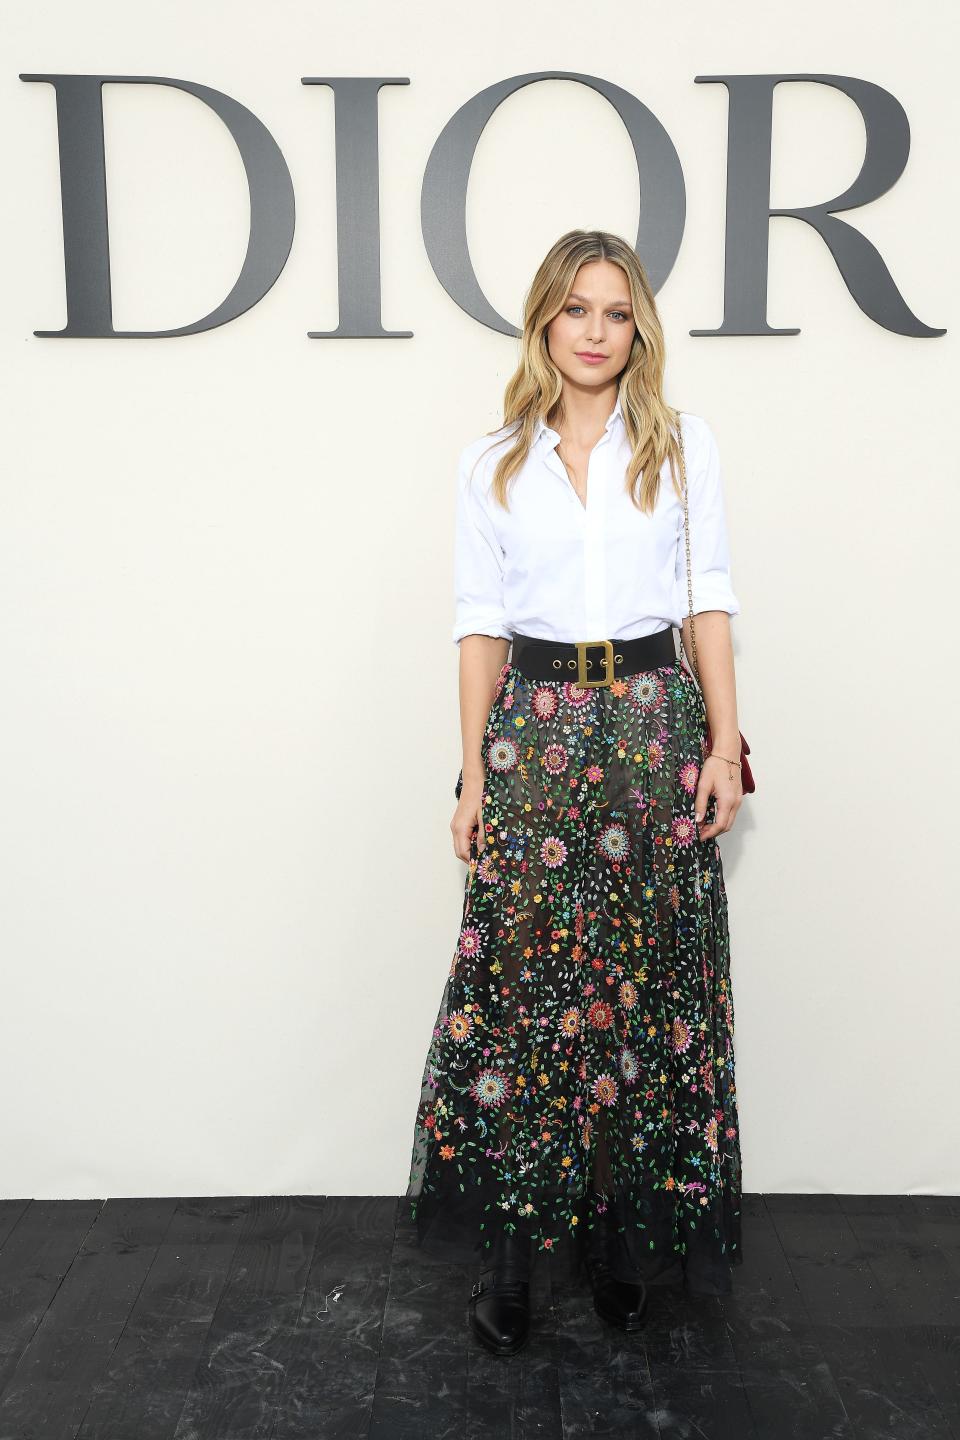 In this file photo from September 24, 2018, Melissa Benoist attended the Christian Dior show during Paris Fashion Week.